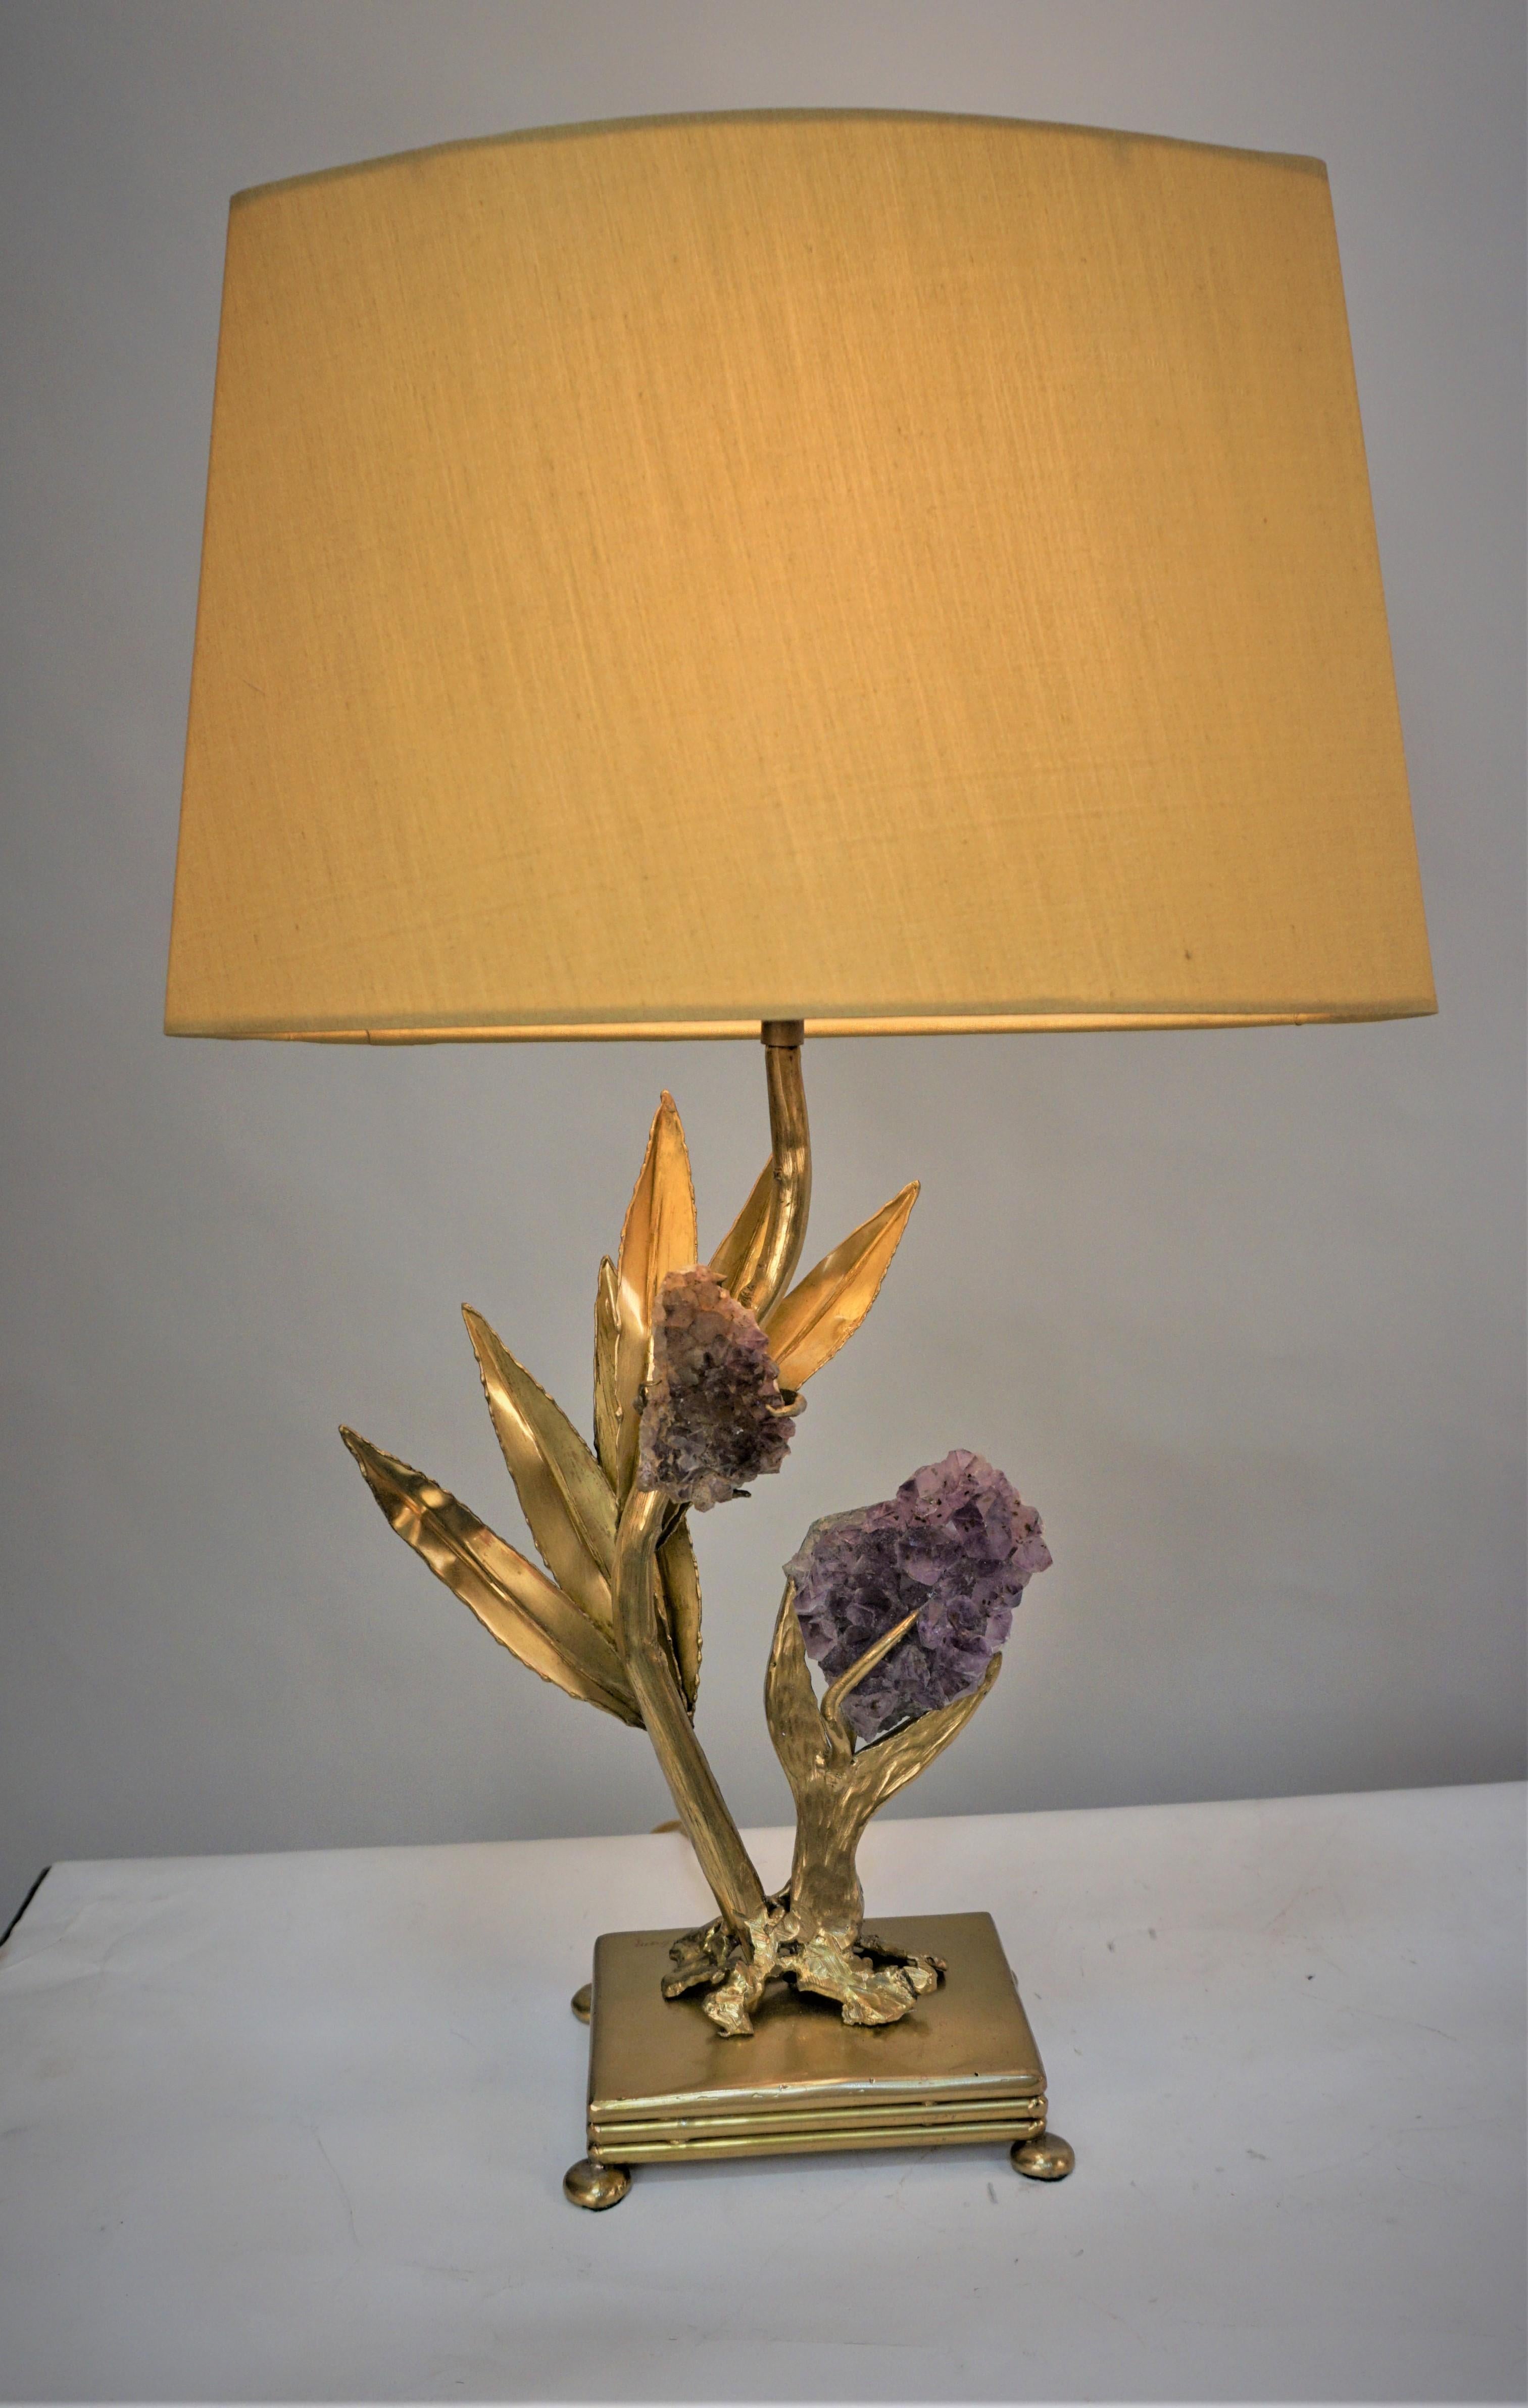 Beautiful hand-crafted bronze with amytas quartz table lamp, fitted with silk hard back lampshade.
Signed Laudrain
Measurement includes the shade.